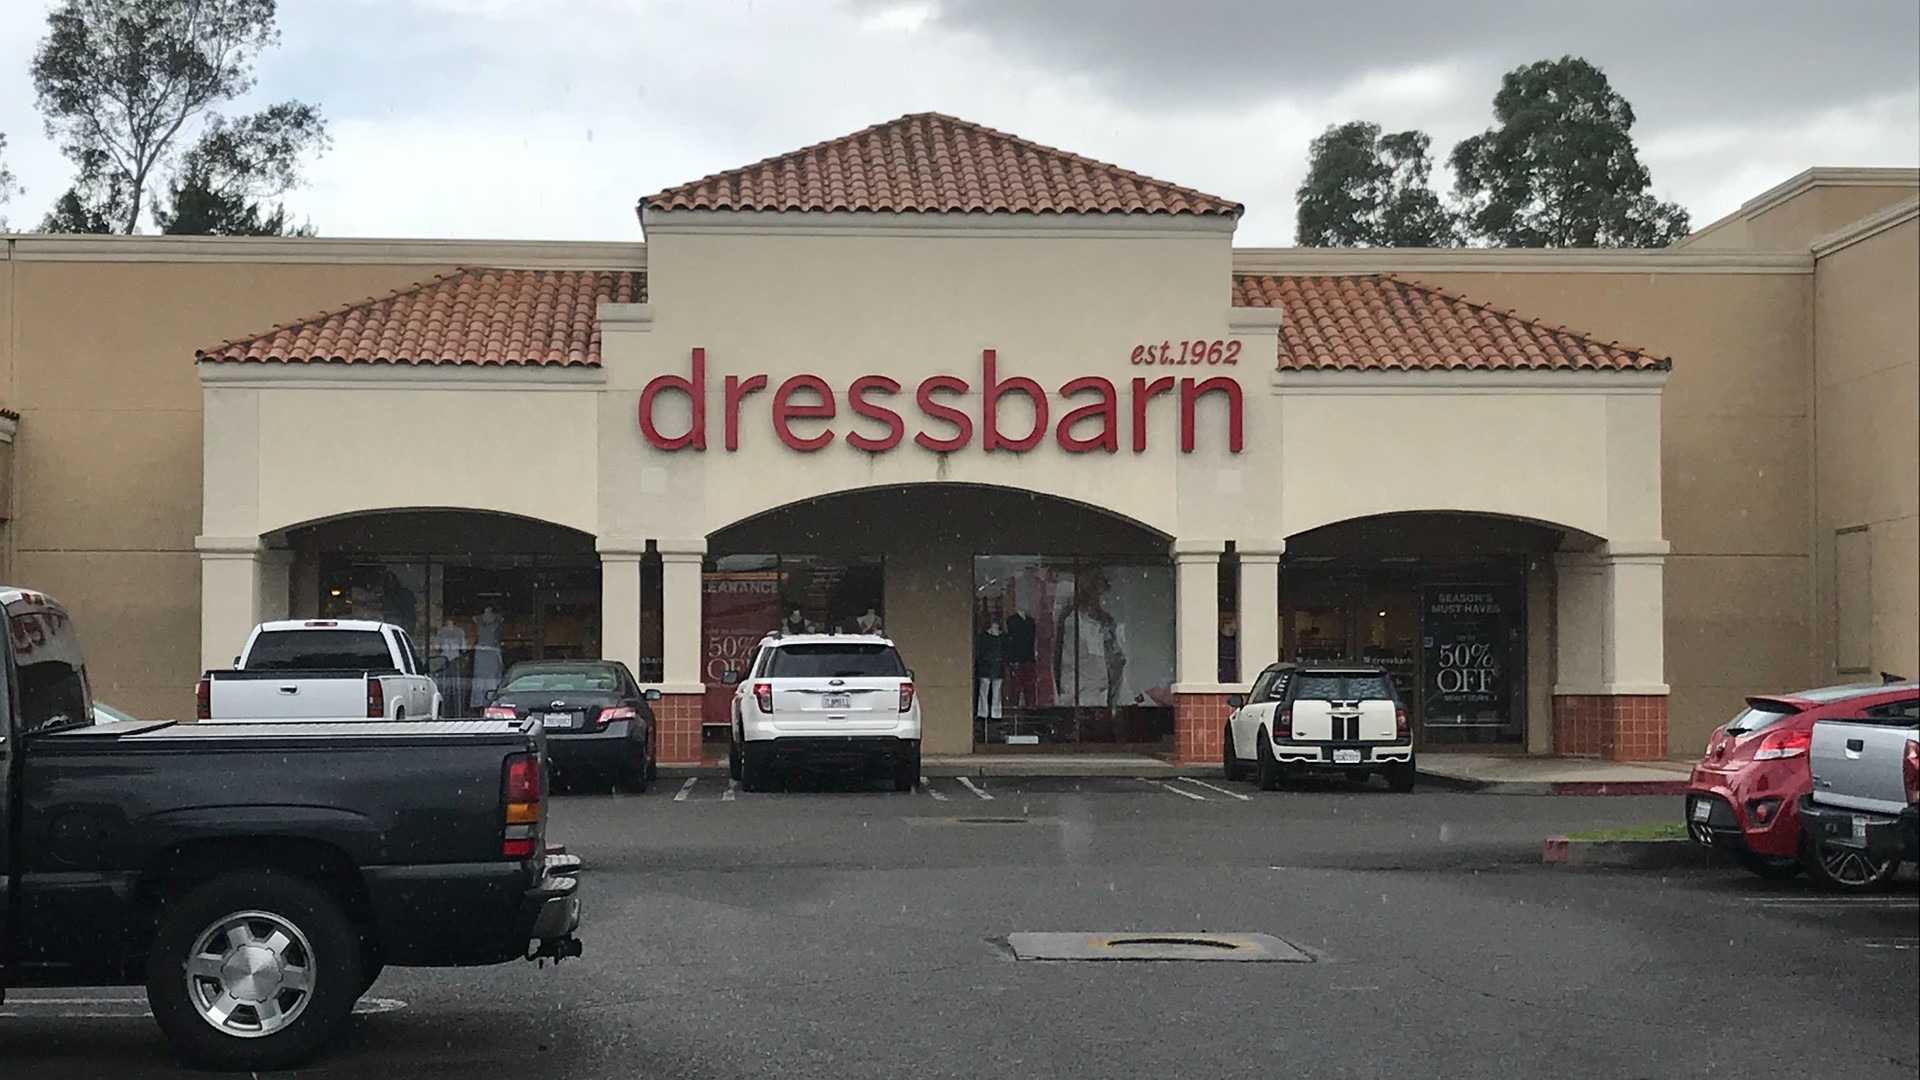 After a closure announcement, Modesto is adding Dressbarn to the string of empty buildings in the city. Officials are trying to make sure these buildings don't stay empty for long.